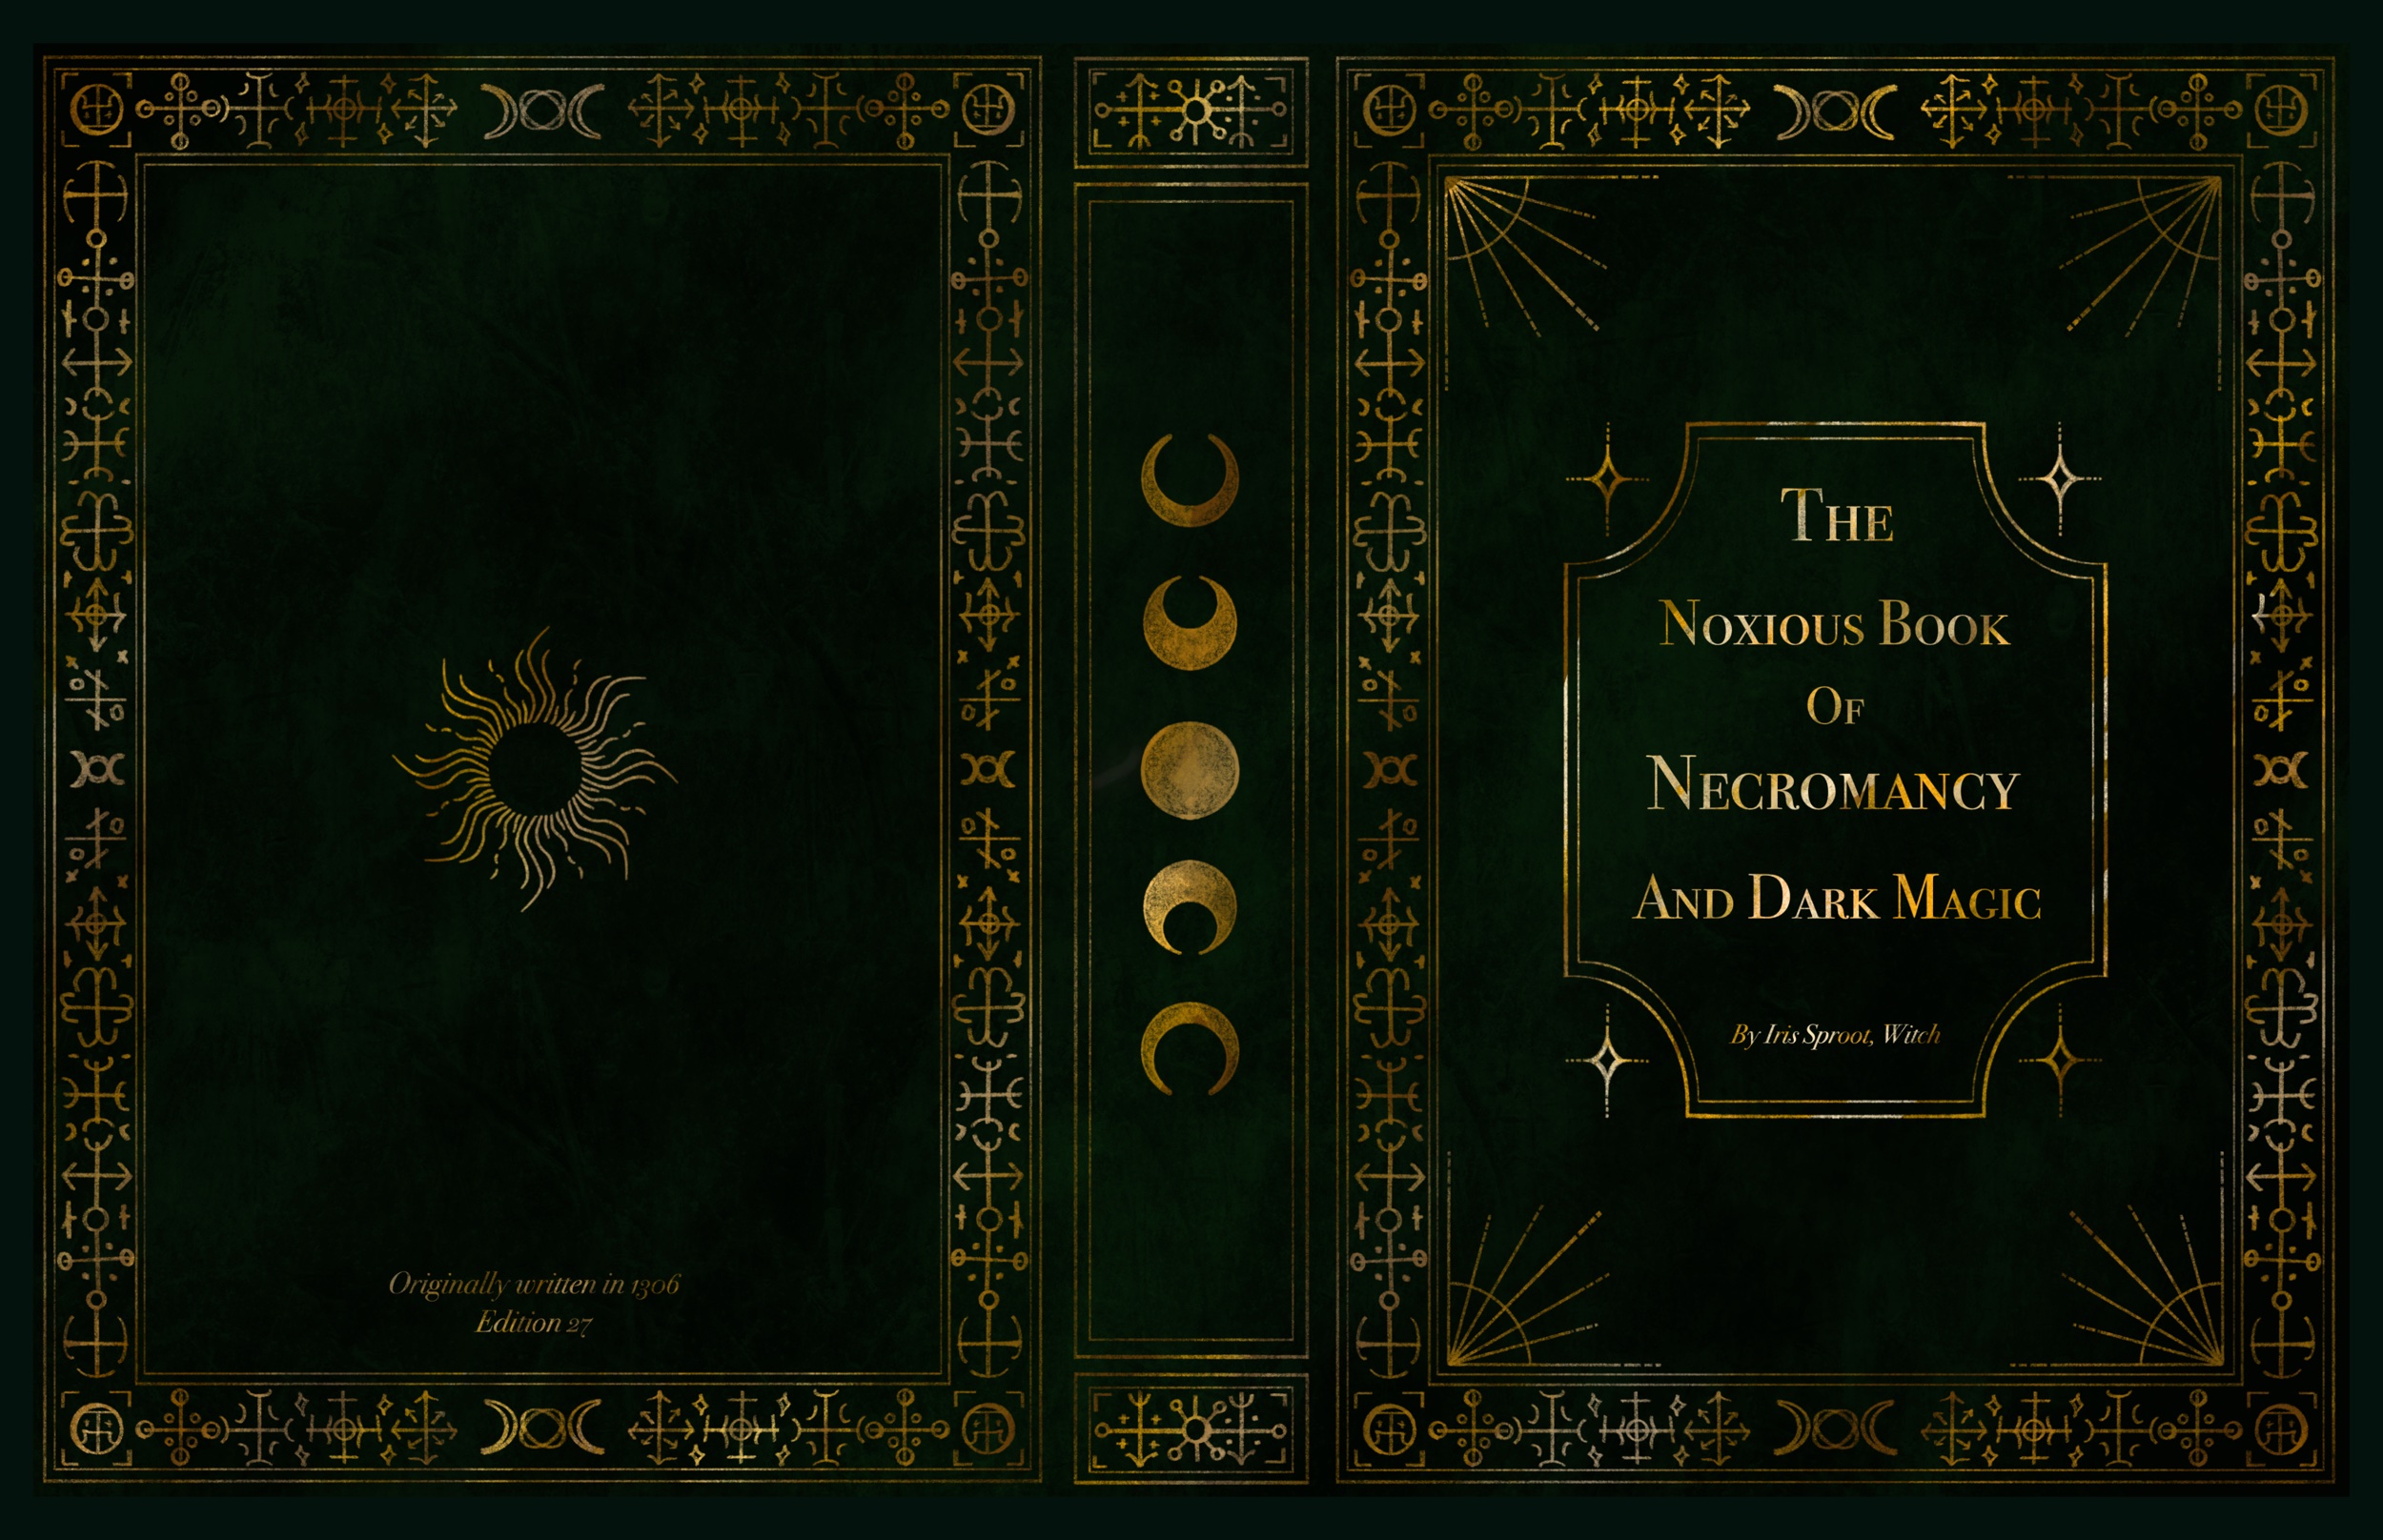 Dark green book cover spread with shining gold detailing of a rectangular border made up of runes consisting of crosses, circles and arrows. With imagery of stars, suns, and moons.